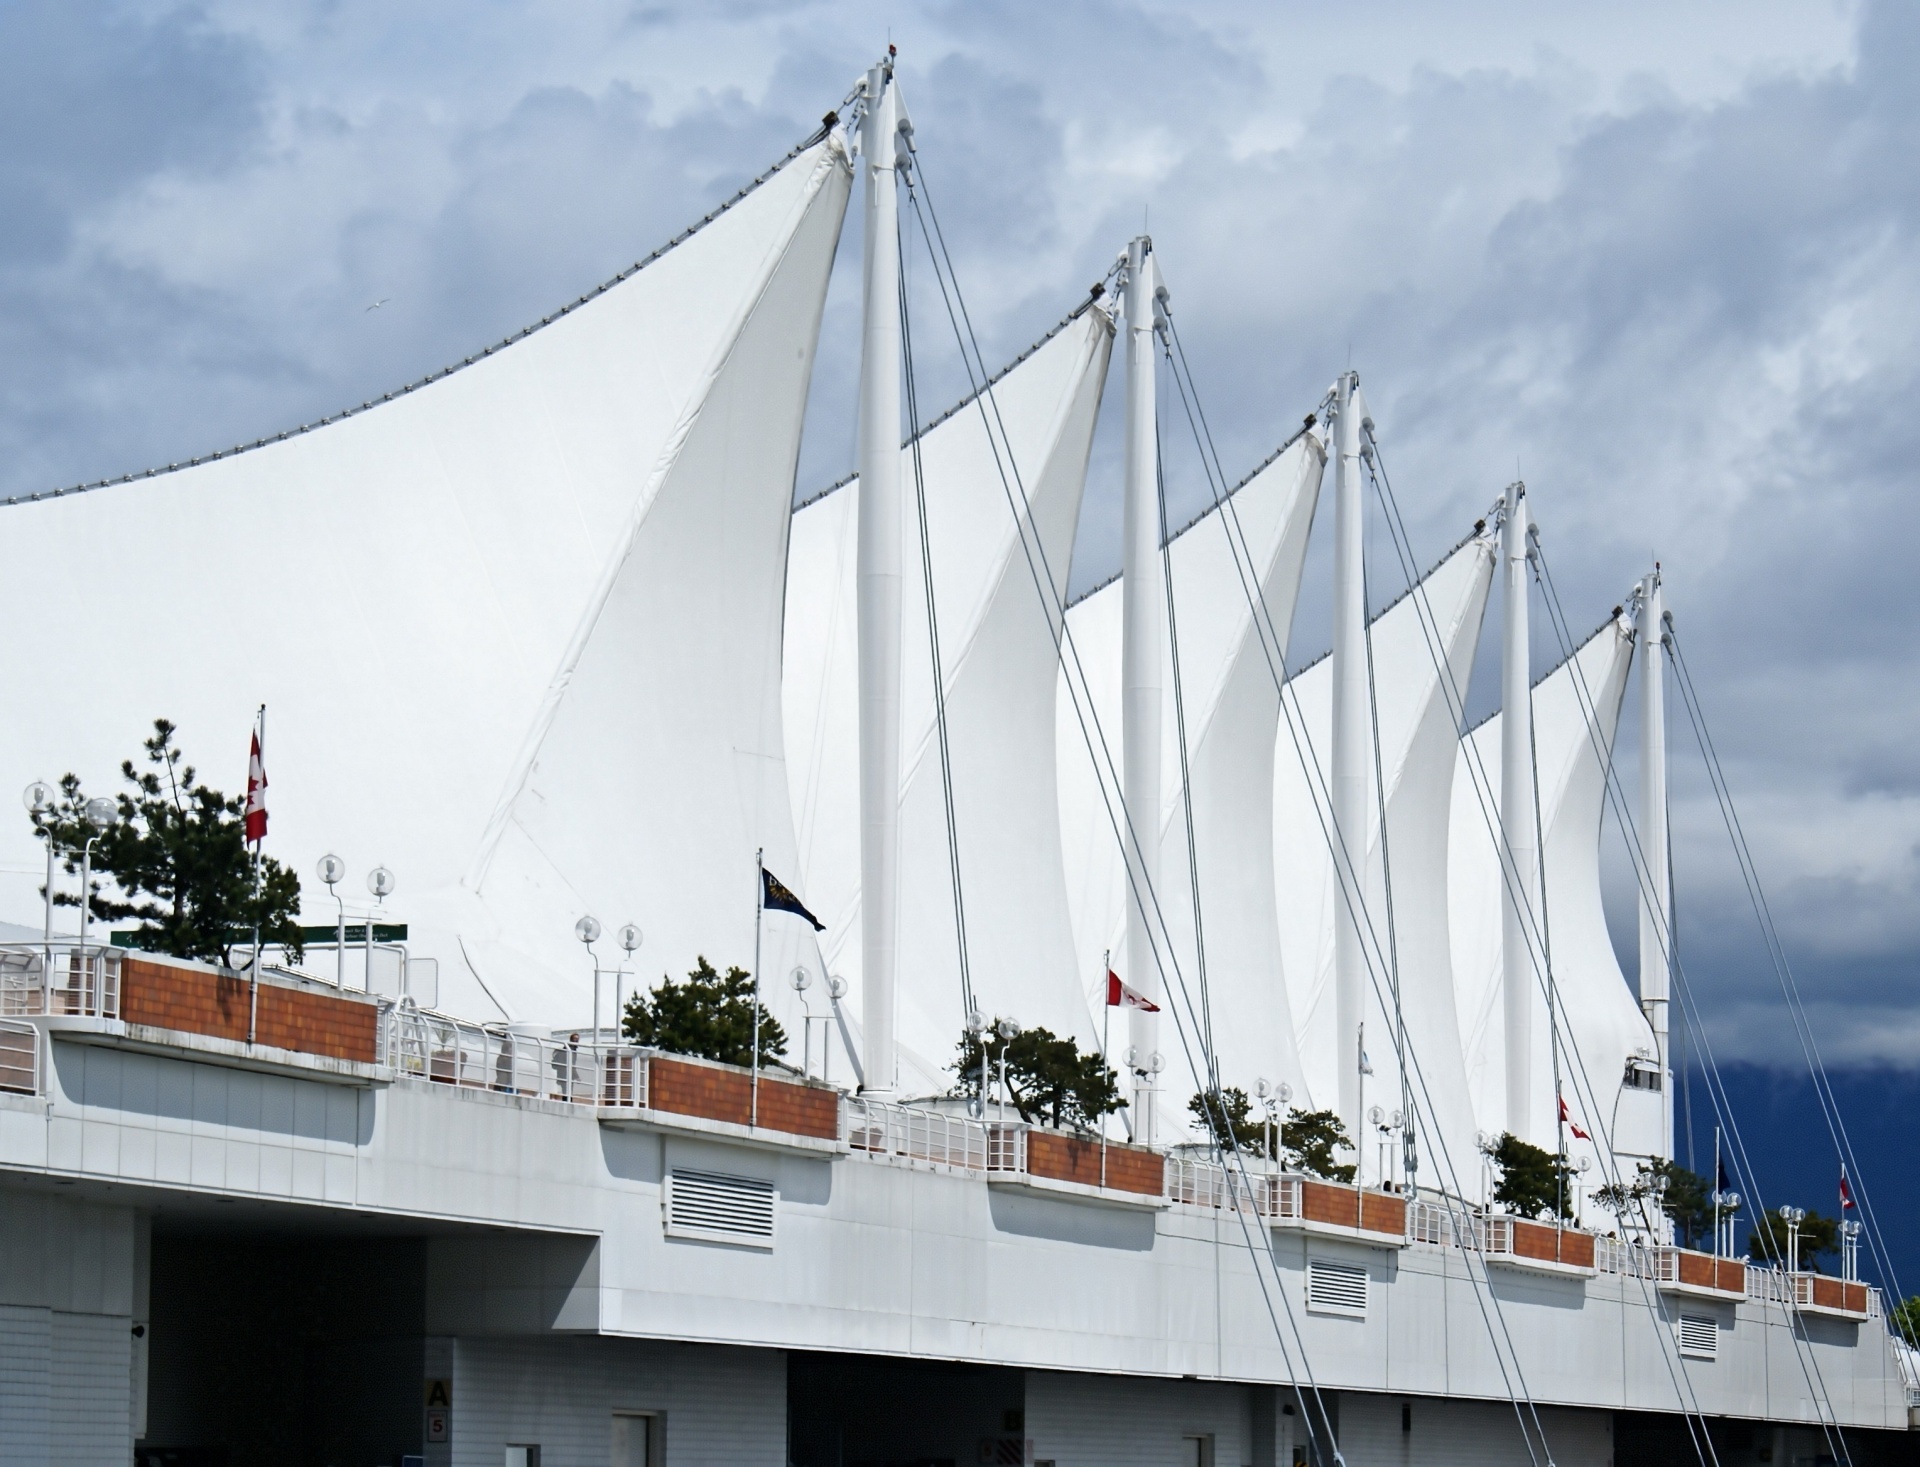 Canada Place Convention Center in Vancouver BC, the city of sails on Canada's west coast.